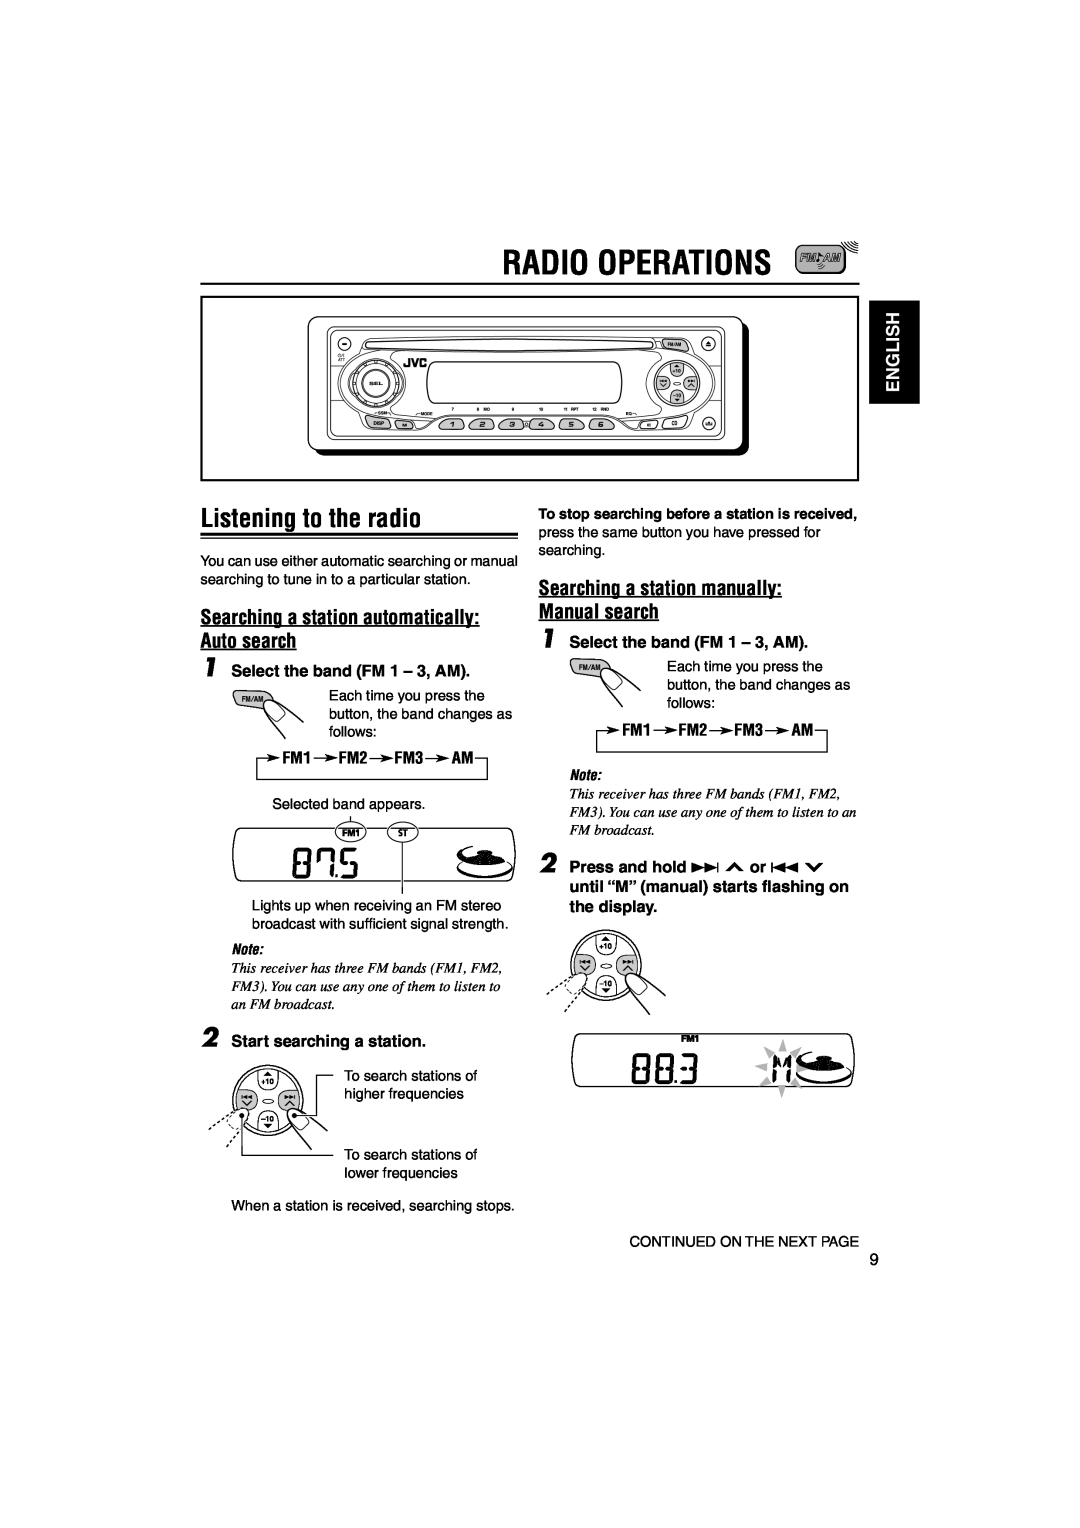 JVC KD-S890 manual Radio Operations, Listening to the radio, Searching a station automatically Auto search, English 